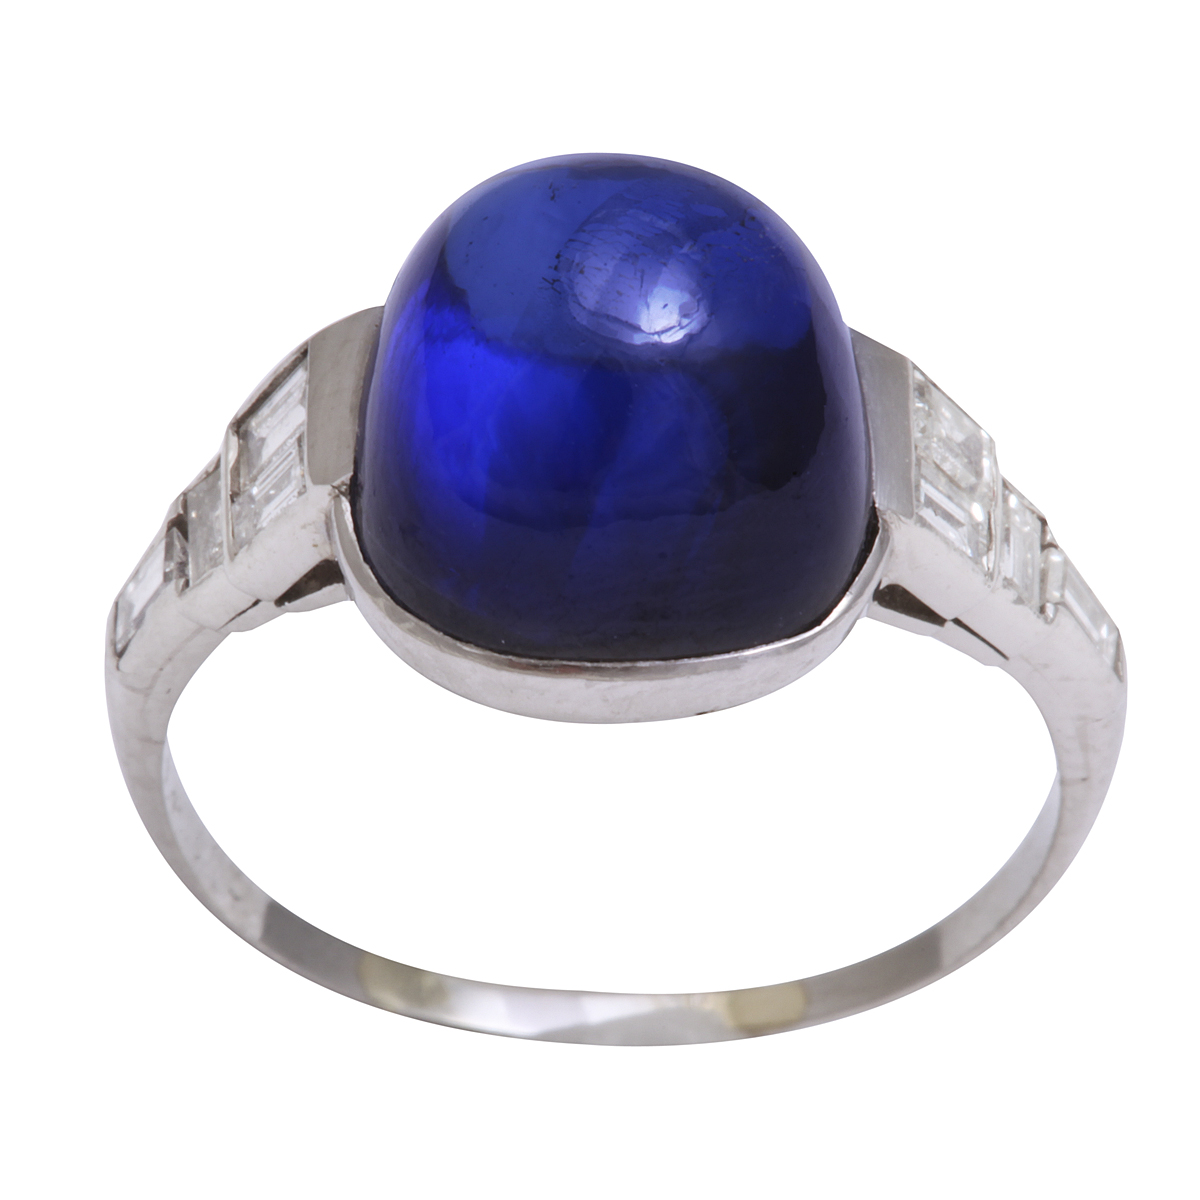 Cabochon Sapphire Ring – A La Vieille Russie FABERGE, Antique Jewelry